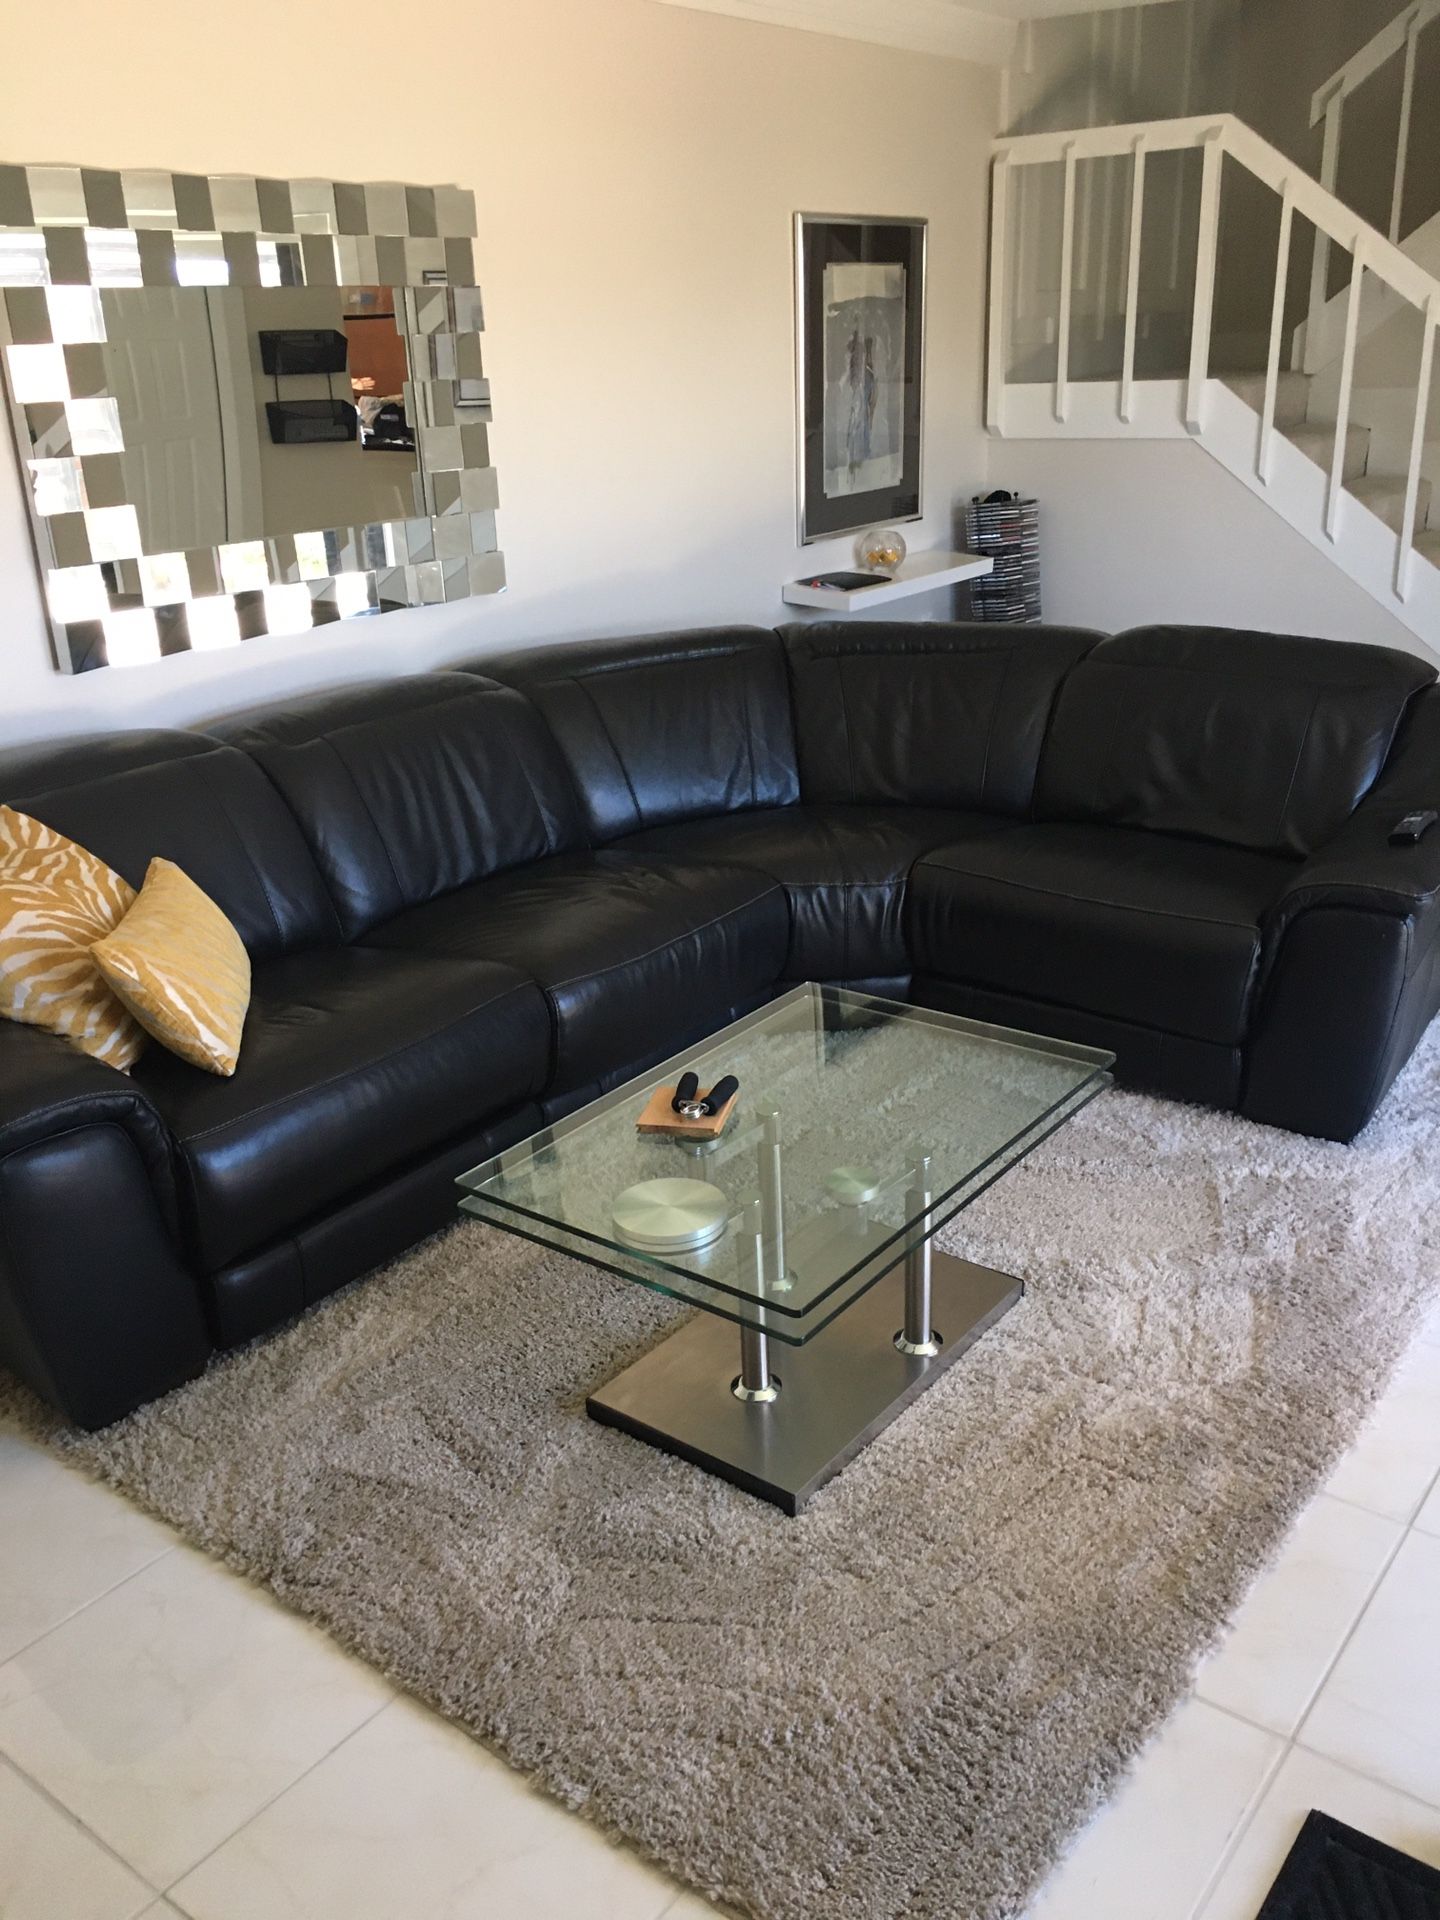 Modern living room set beautiful leather sectional with two recliners and console Plus modern glass and Chrome motion table $1700